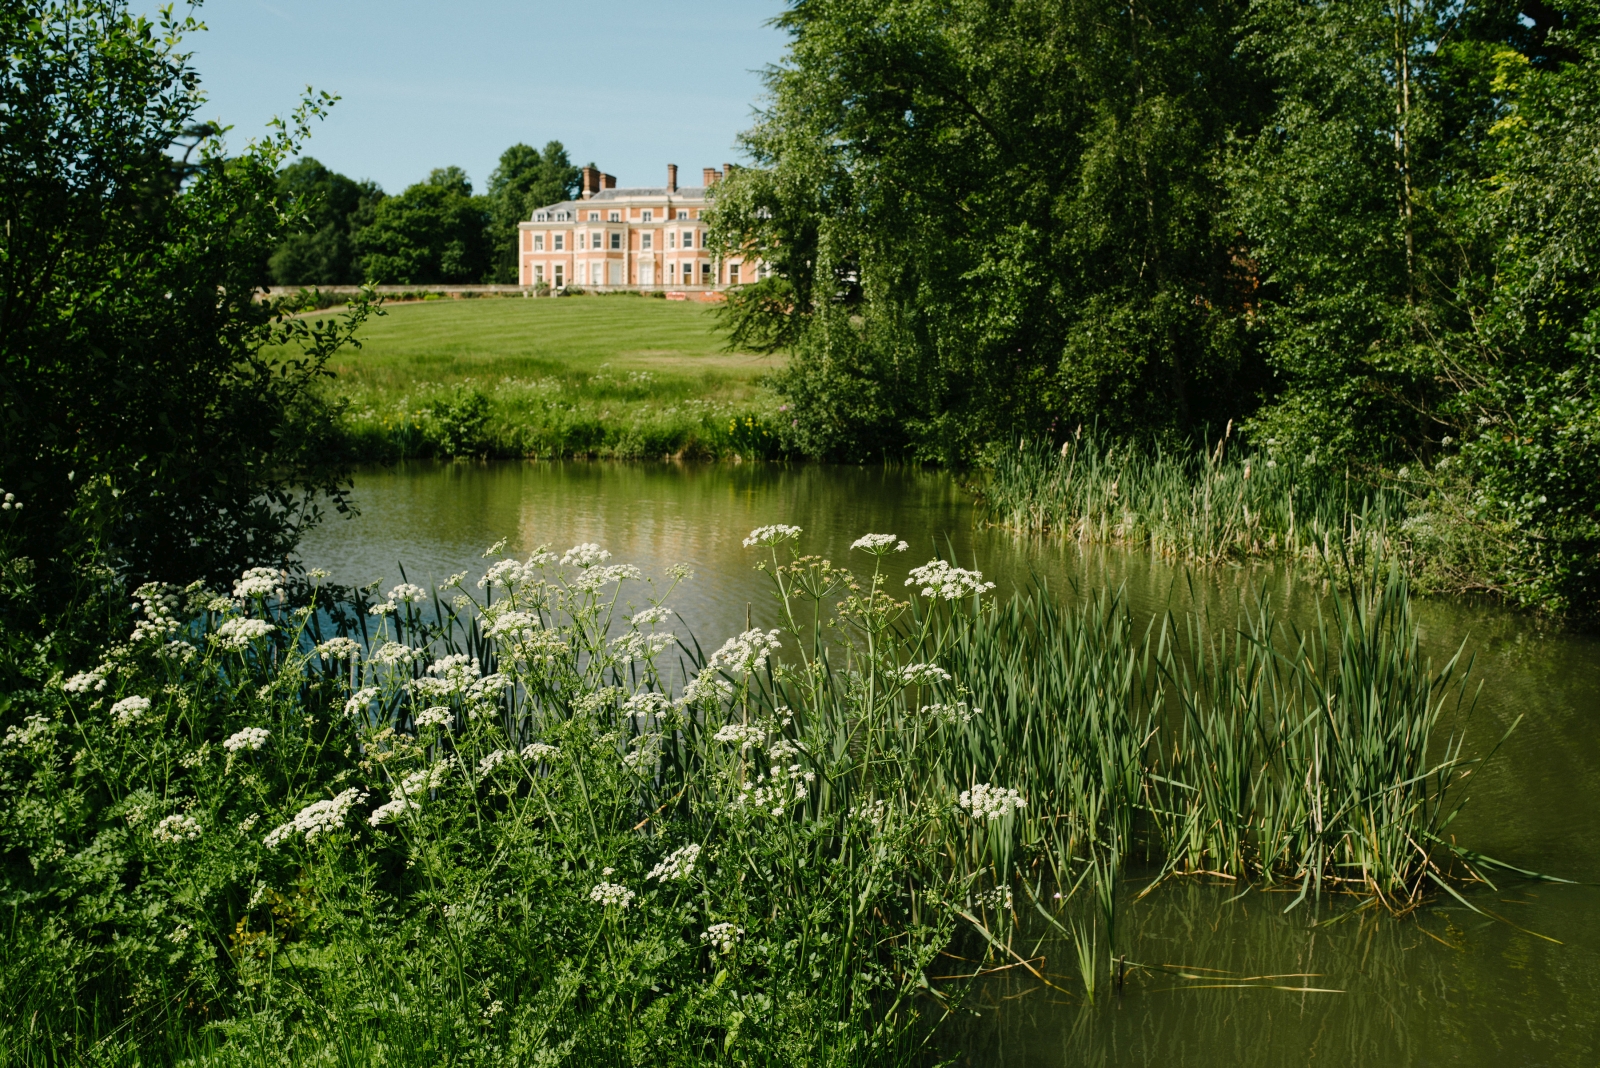 Lake view of Heckfield Place in England